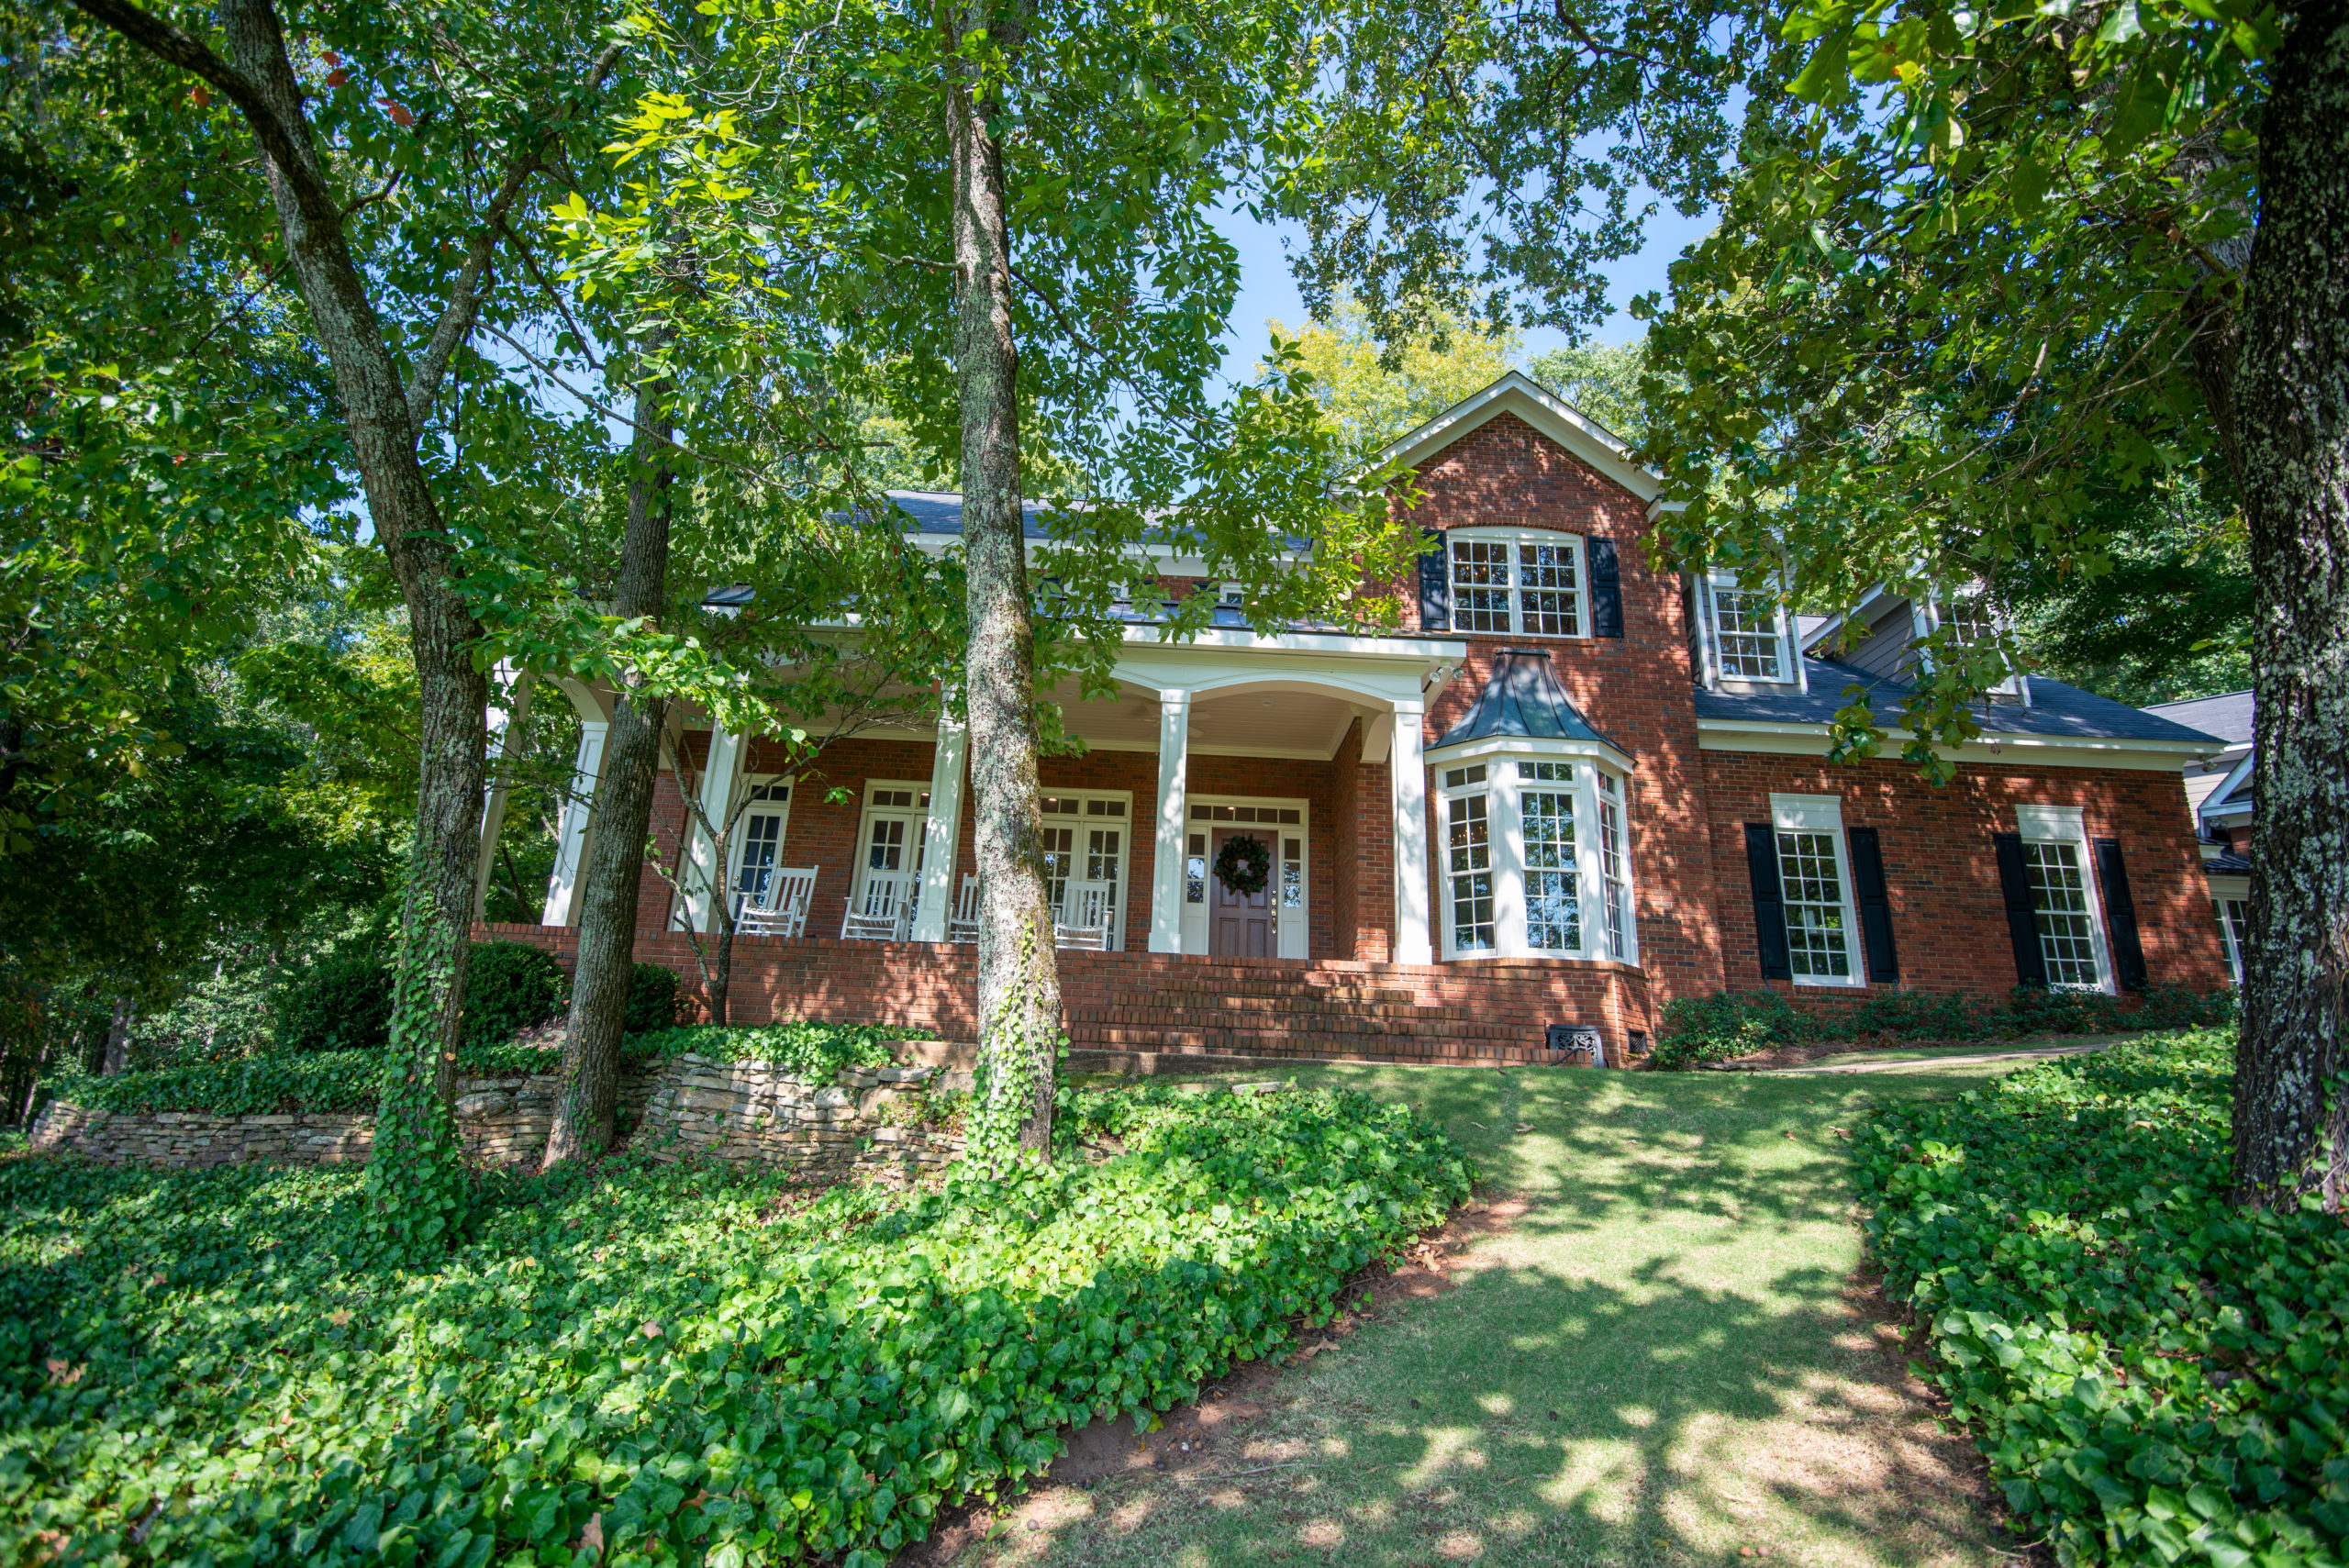 Red brick two-story house with white columns on the front porch, surrounded by mature trees and ivy ground cover on a sunny day.